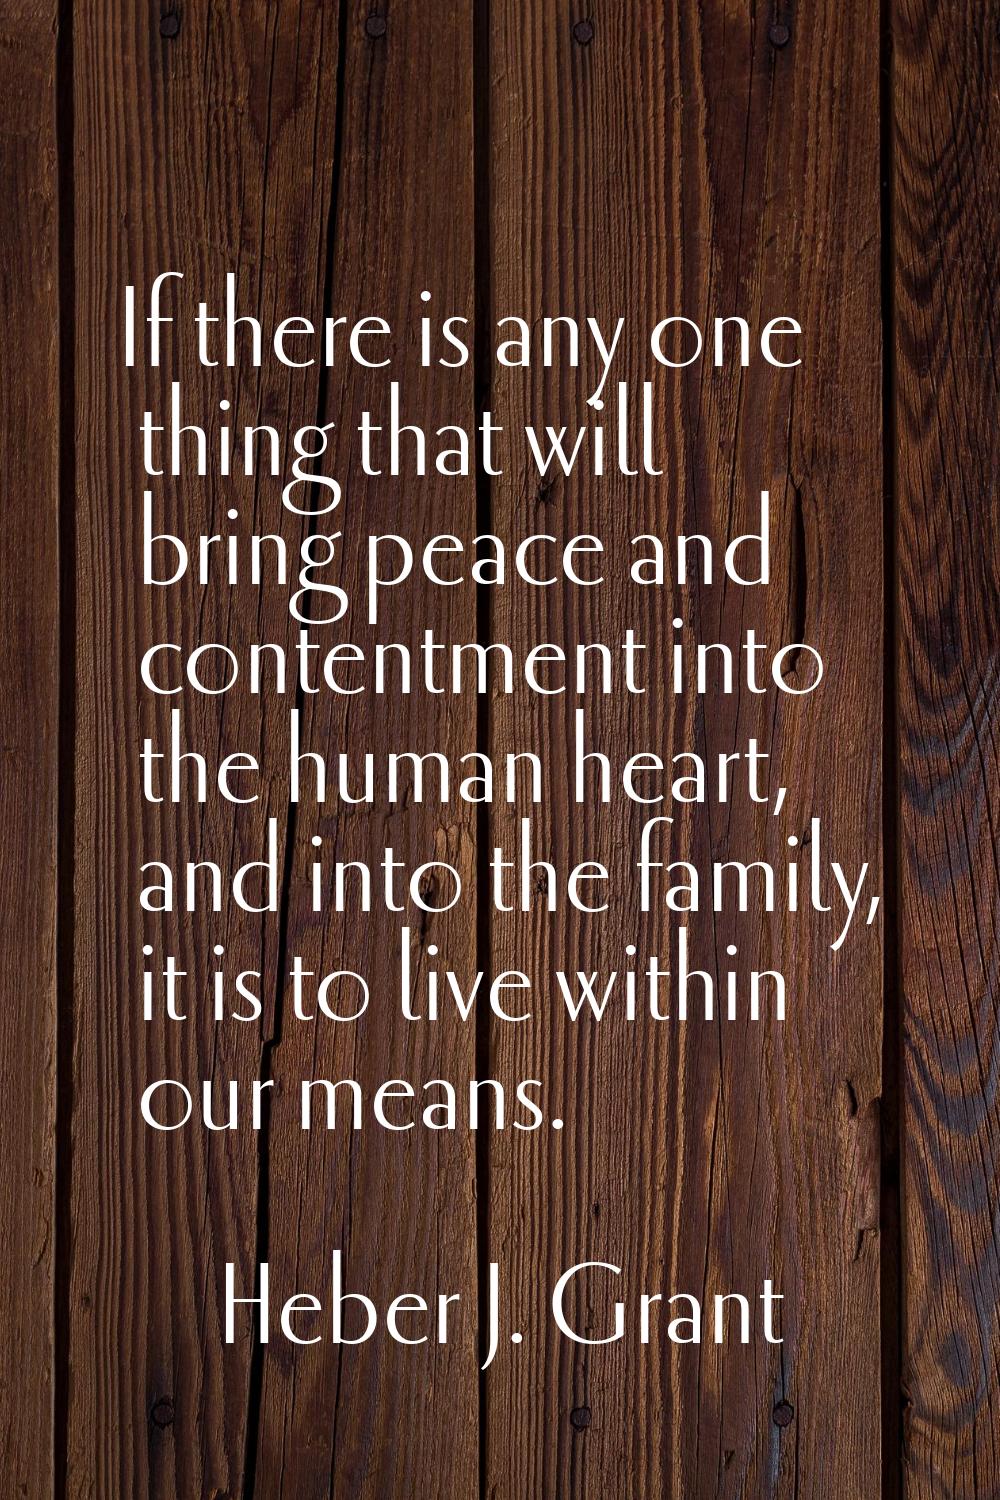 If there is any one thing that will bring peace and contentment into the human heart, and into the 